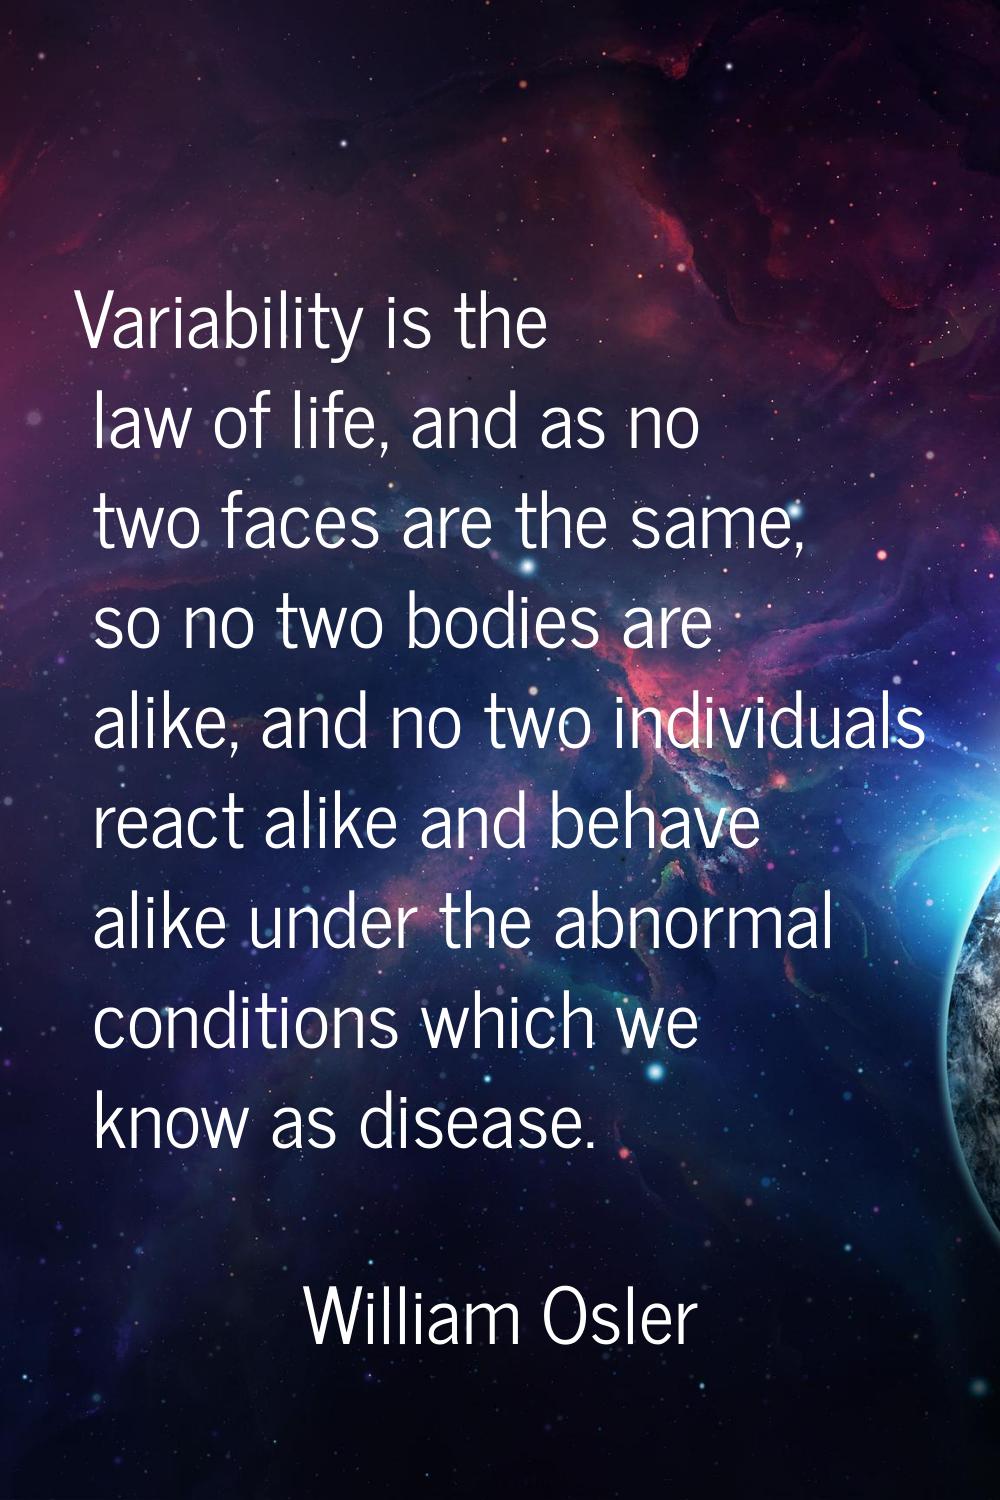 Variability is the law of life, and as no two faces are the same, so no two bodies are alike, and n